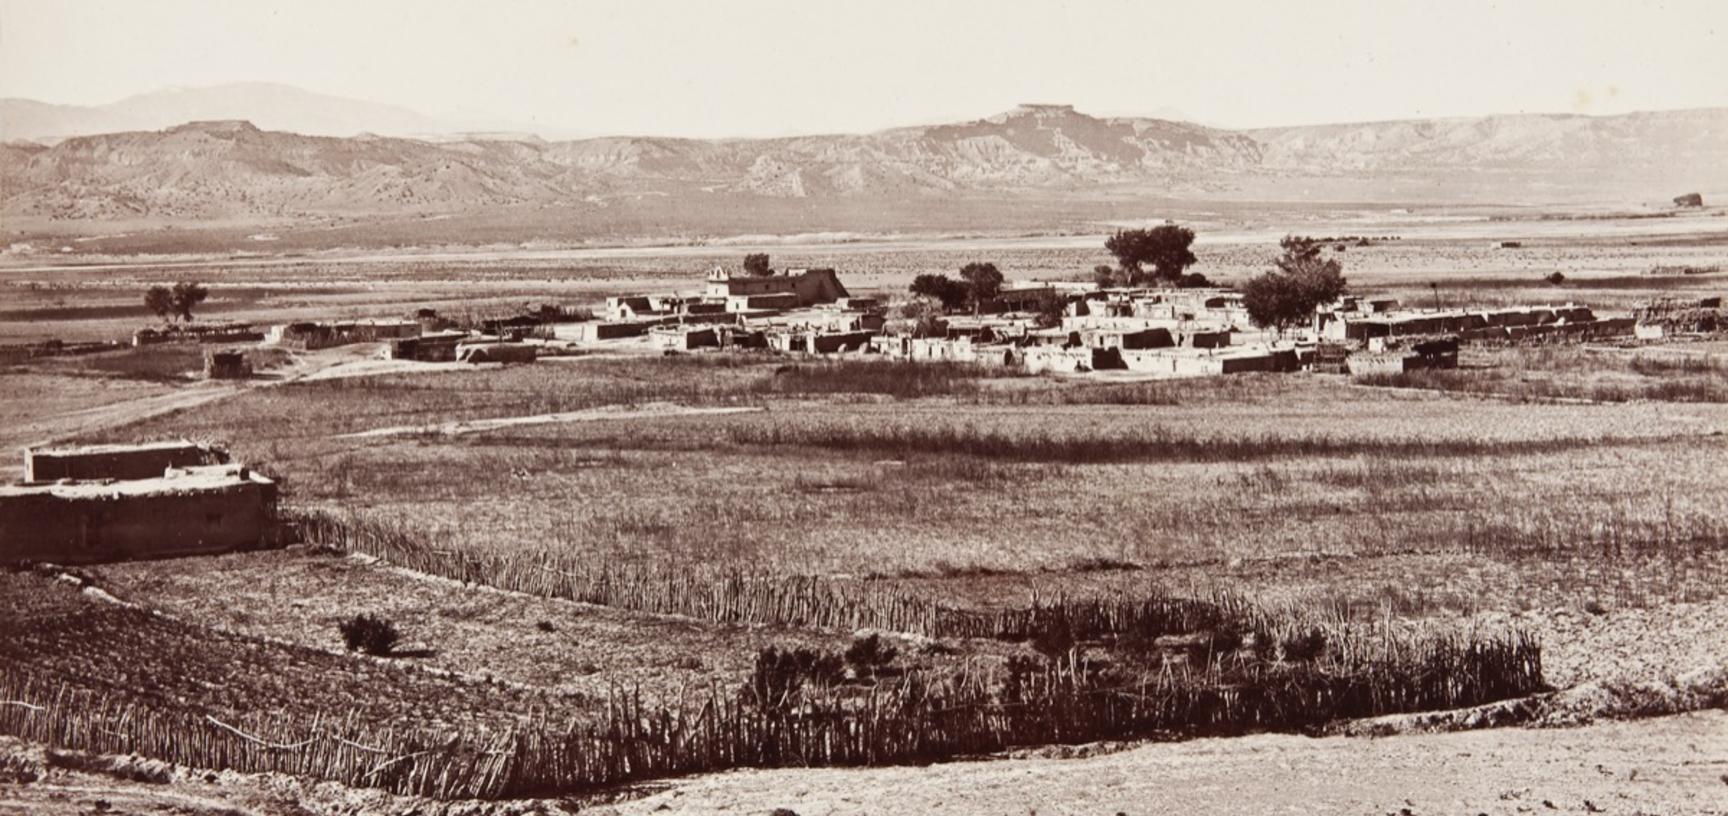 San Ildefonso Pueblo, possibly established as early as 1300, with its church (constructed under the direction of the Franciscans in 1717) clearly visible in the distance. 